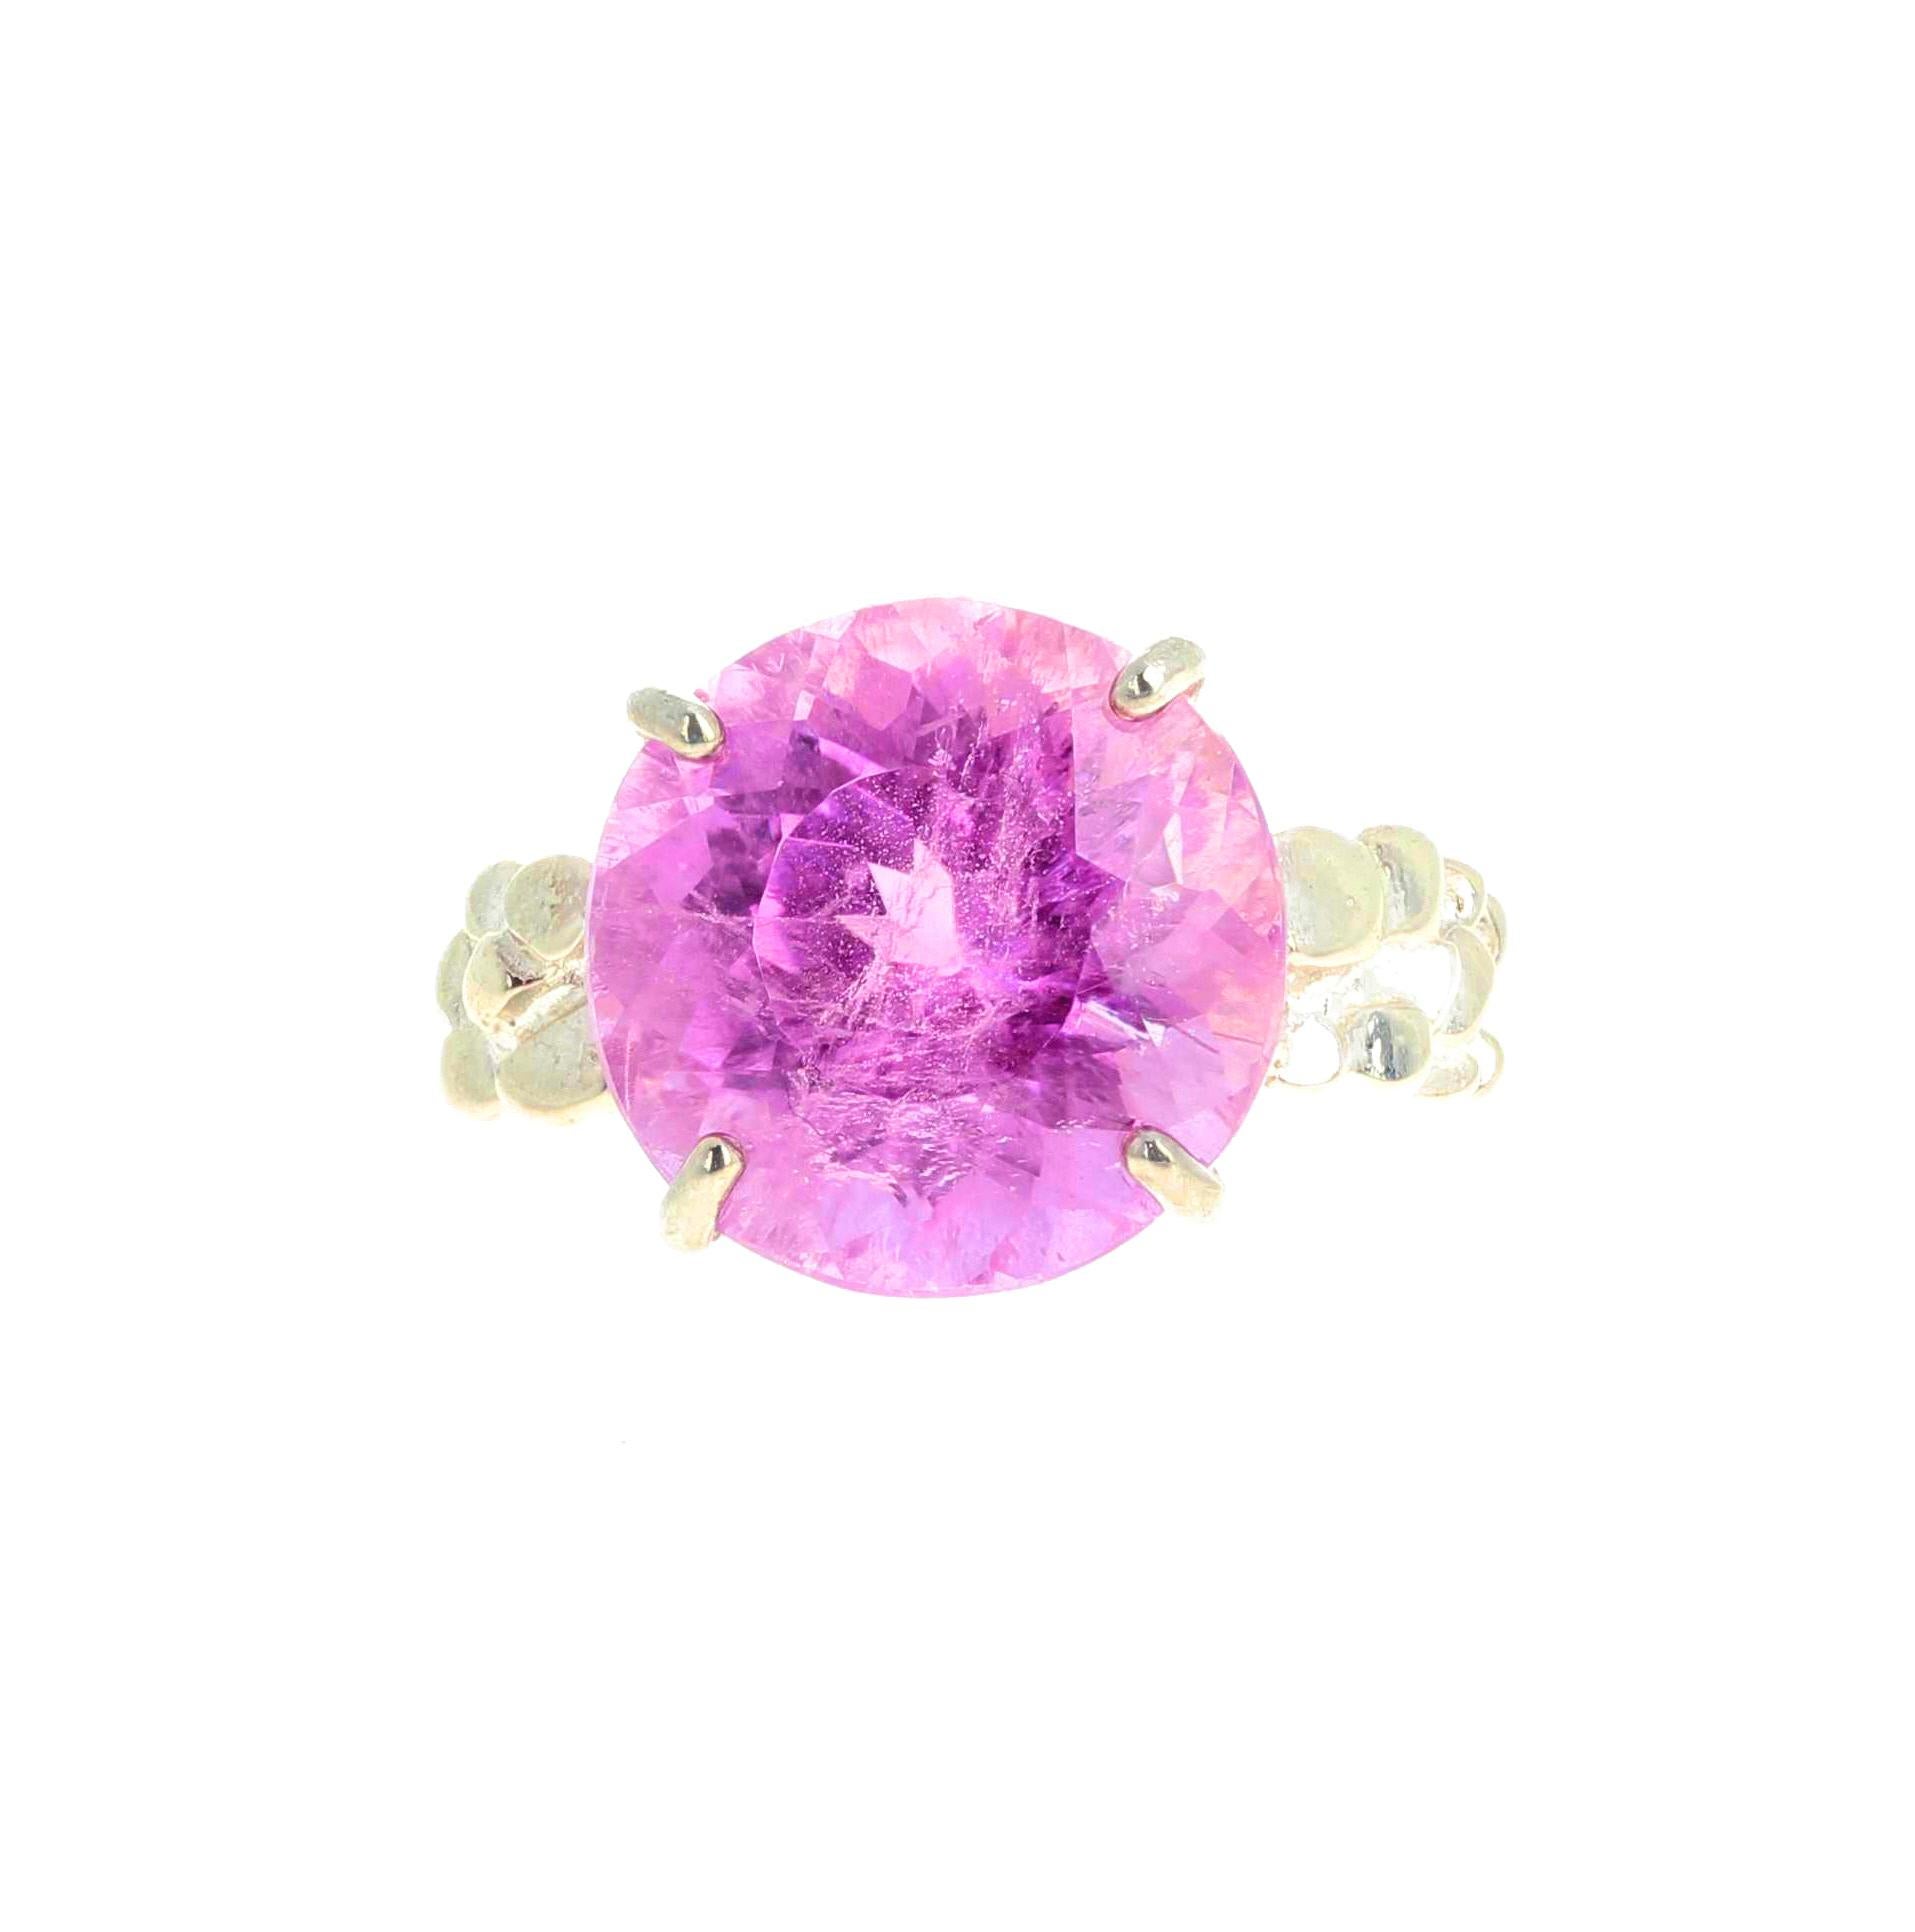 AJD Extraordinary Sparkling 13.5Ct BrightPinky Kunzite Silver Cocktail Ring For Sale 3